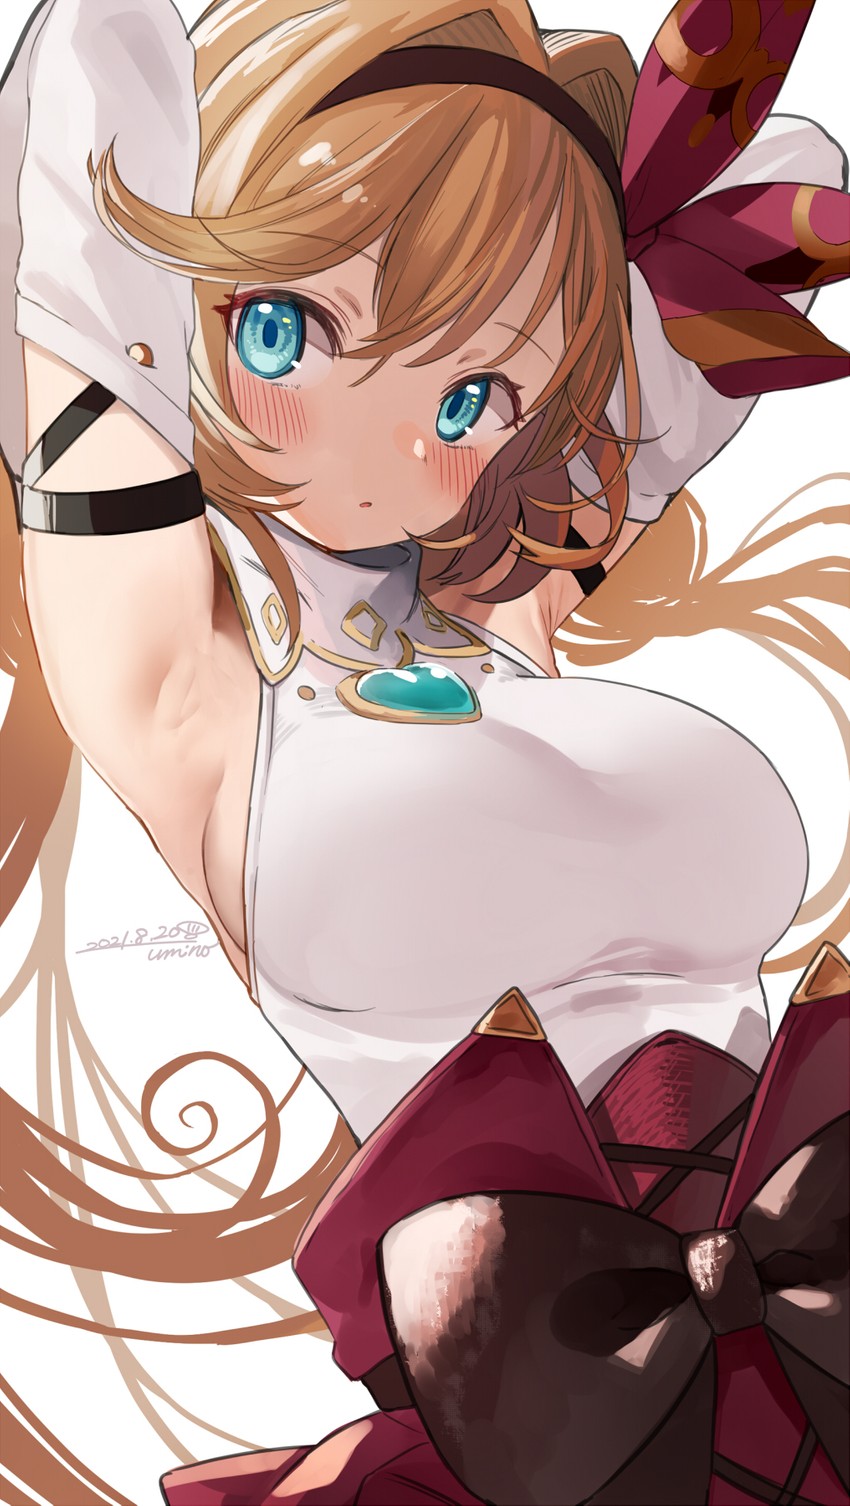 clarisse and clarisse (granblue fantasy) drawn by umino_hotate